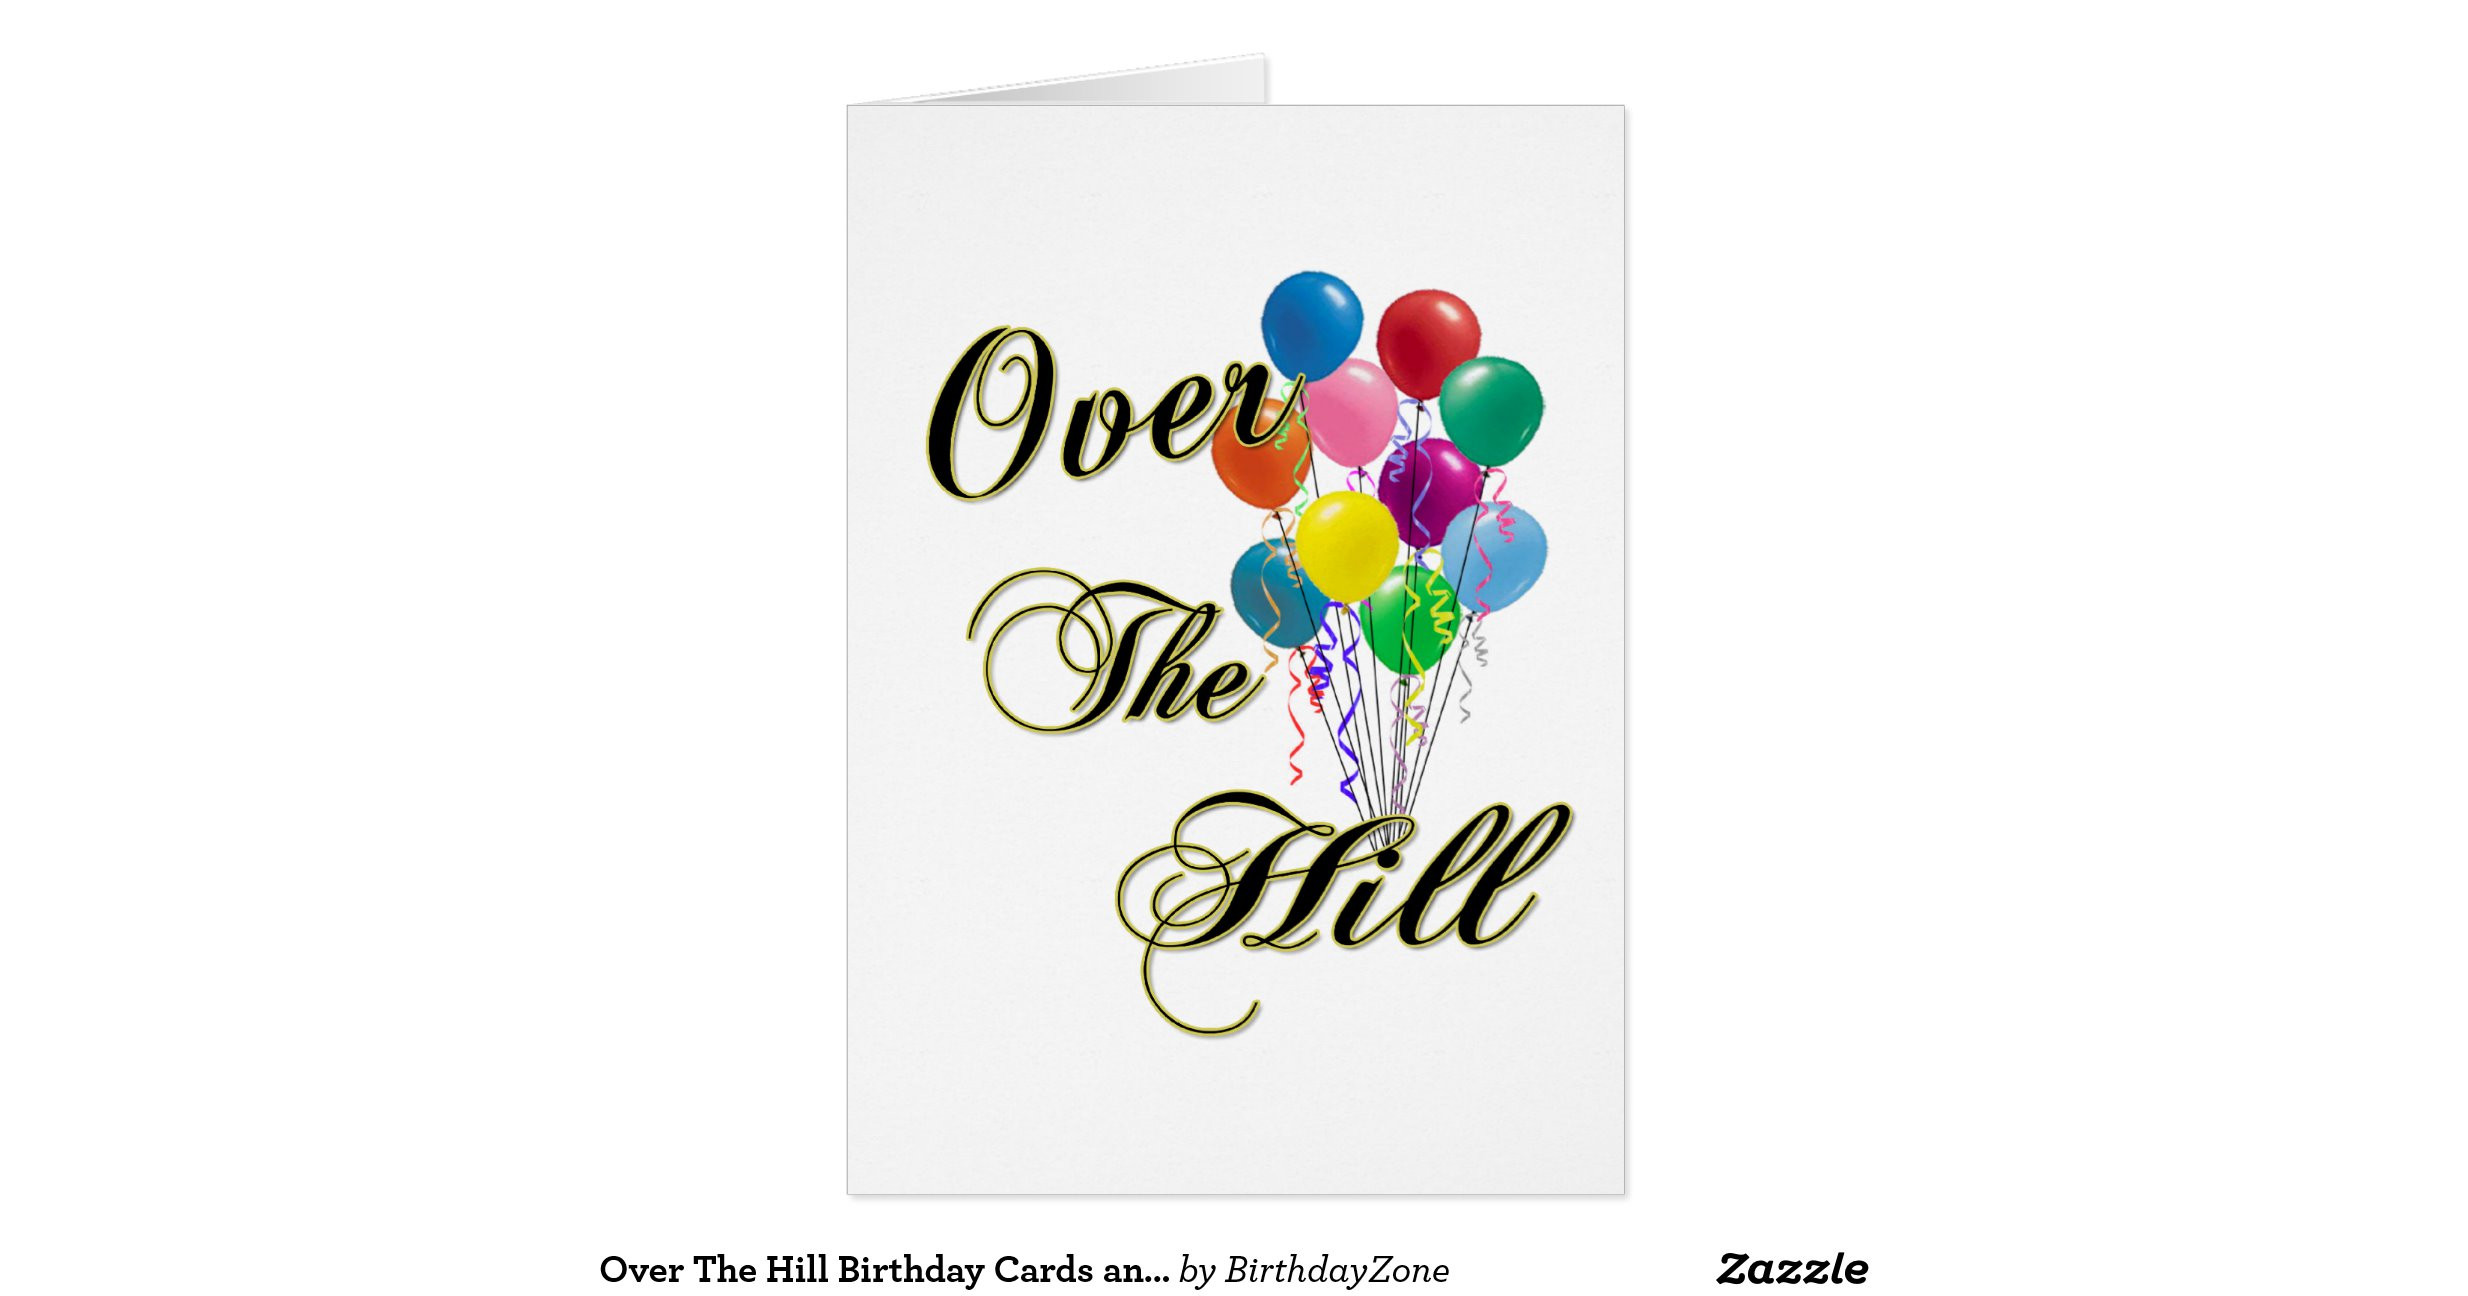 Over The Hill Birthday Cards
 over the hill birthday cards and post cards